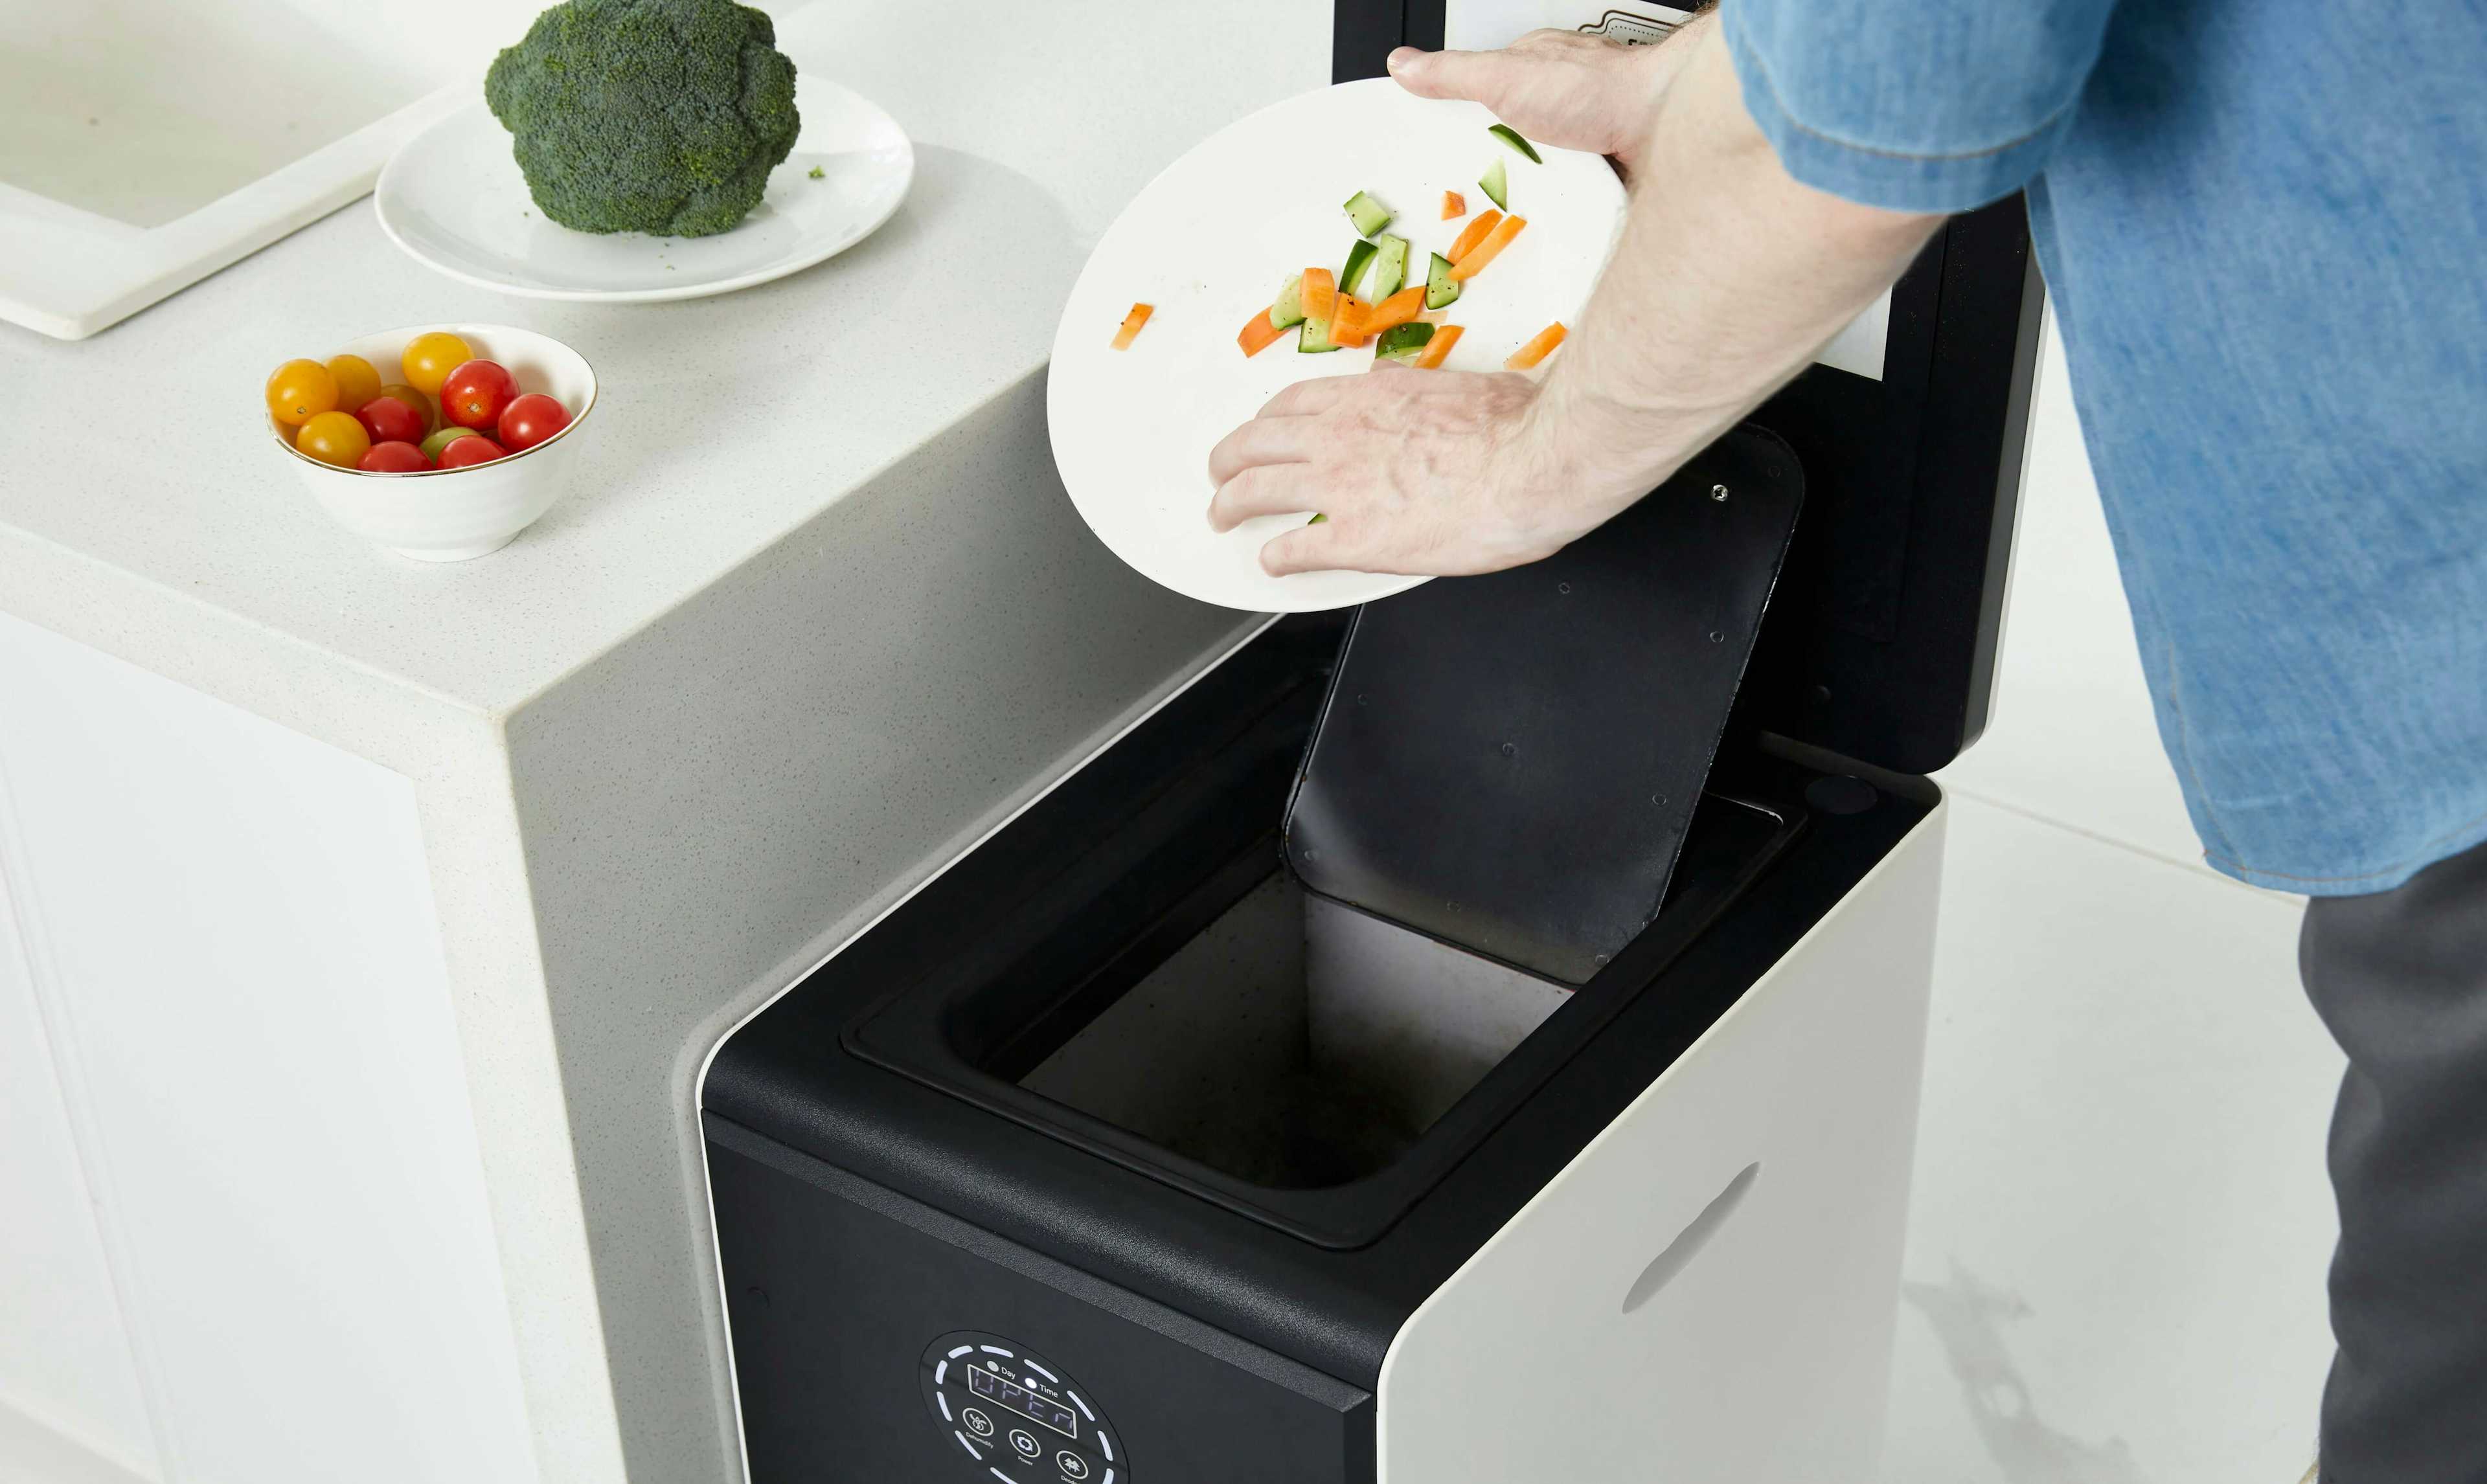 GEME take care of your food waste